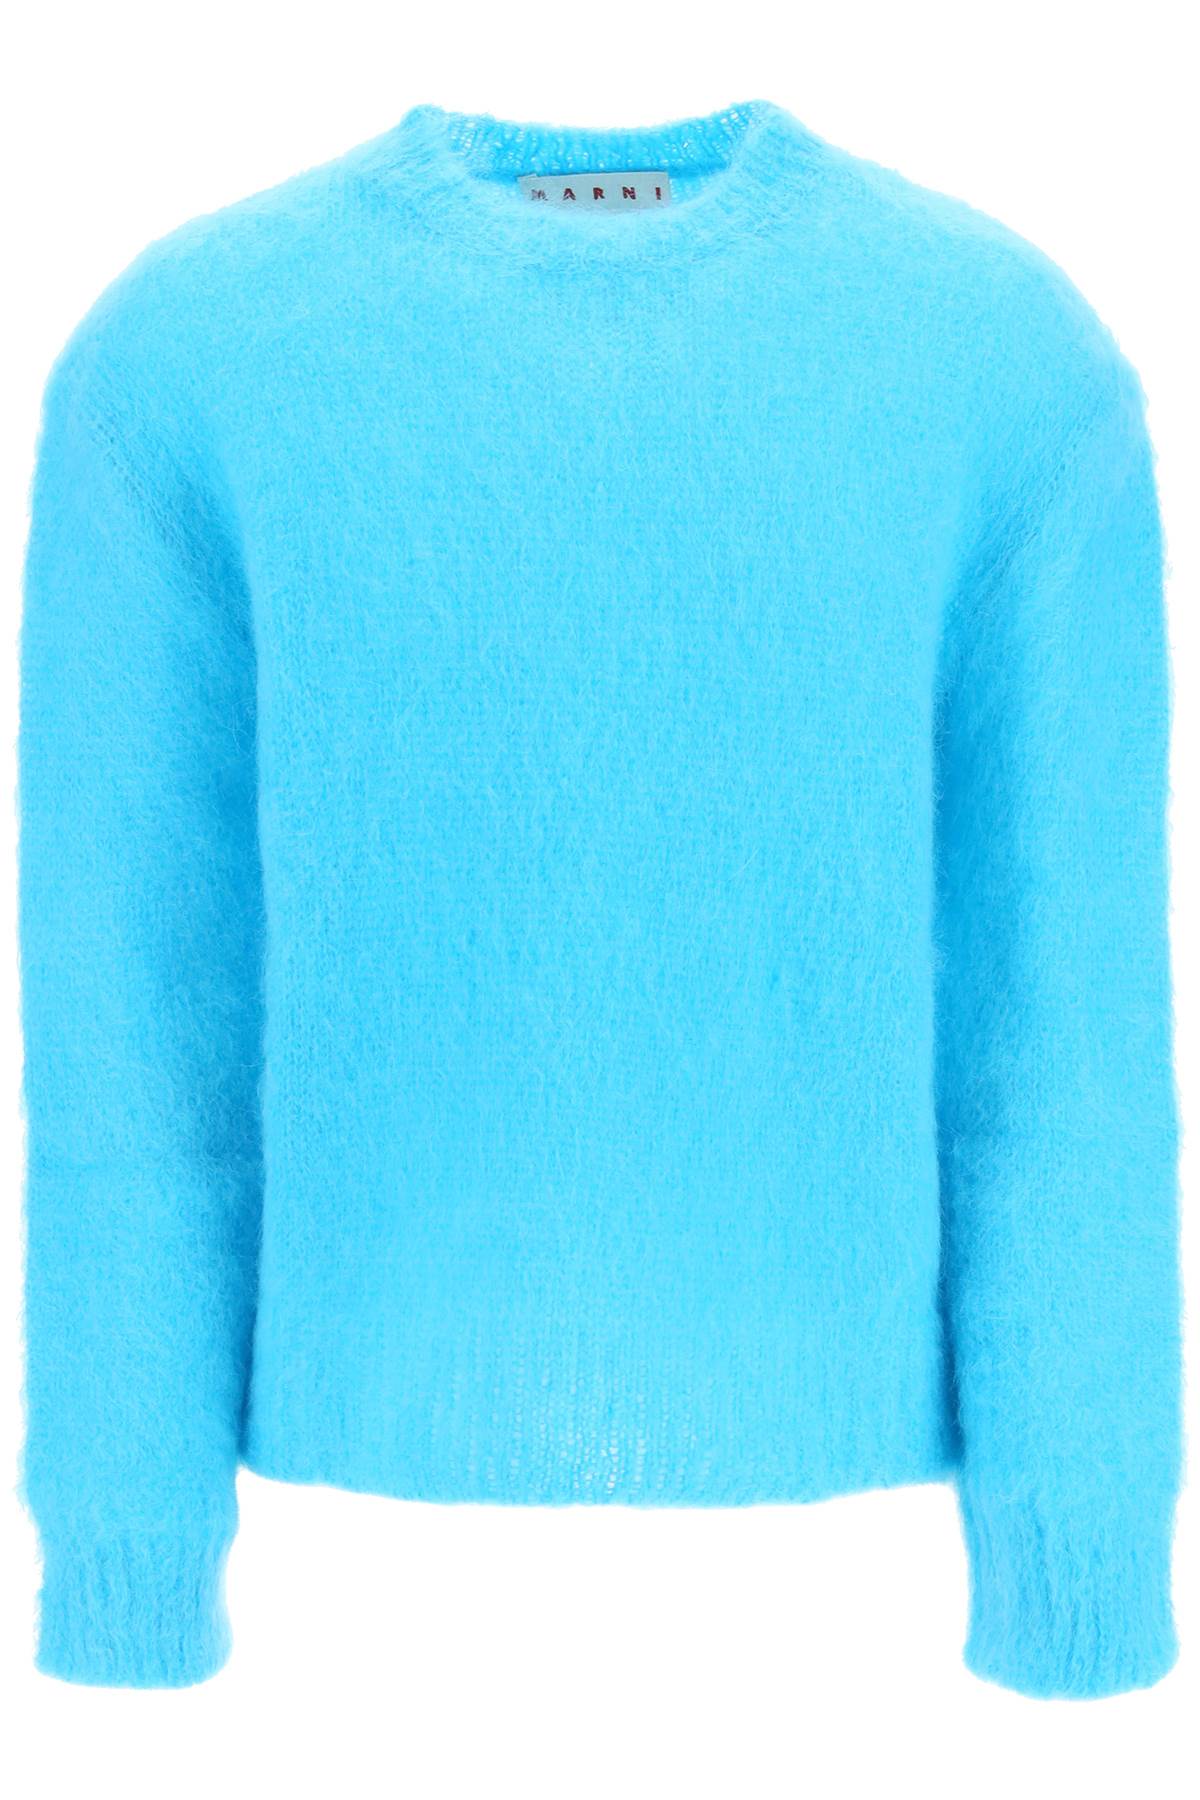 Marni Brushed Mohair Sweater